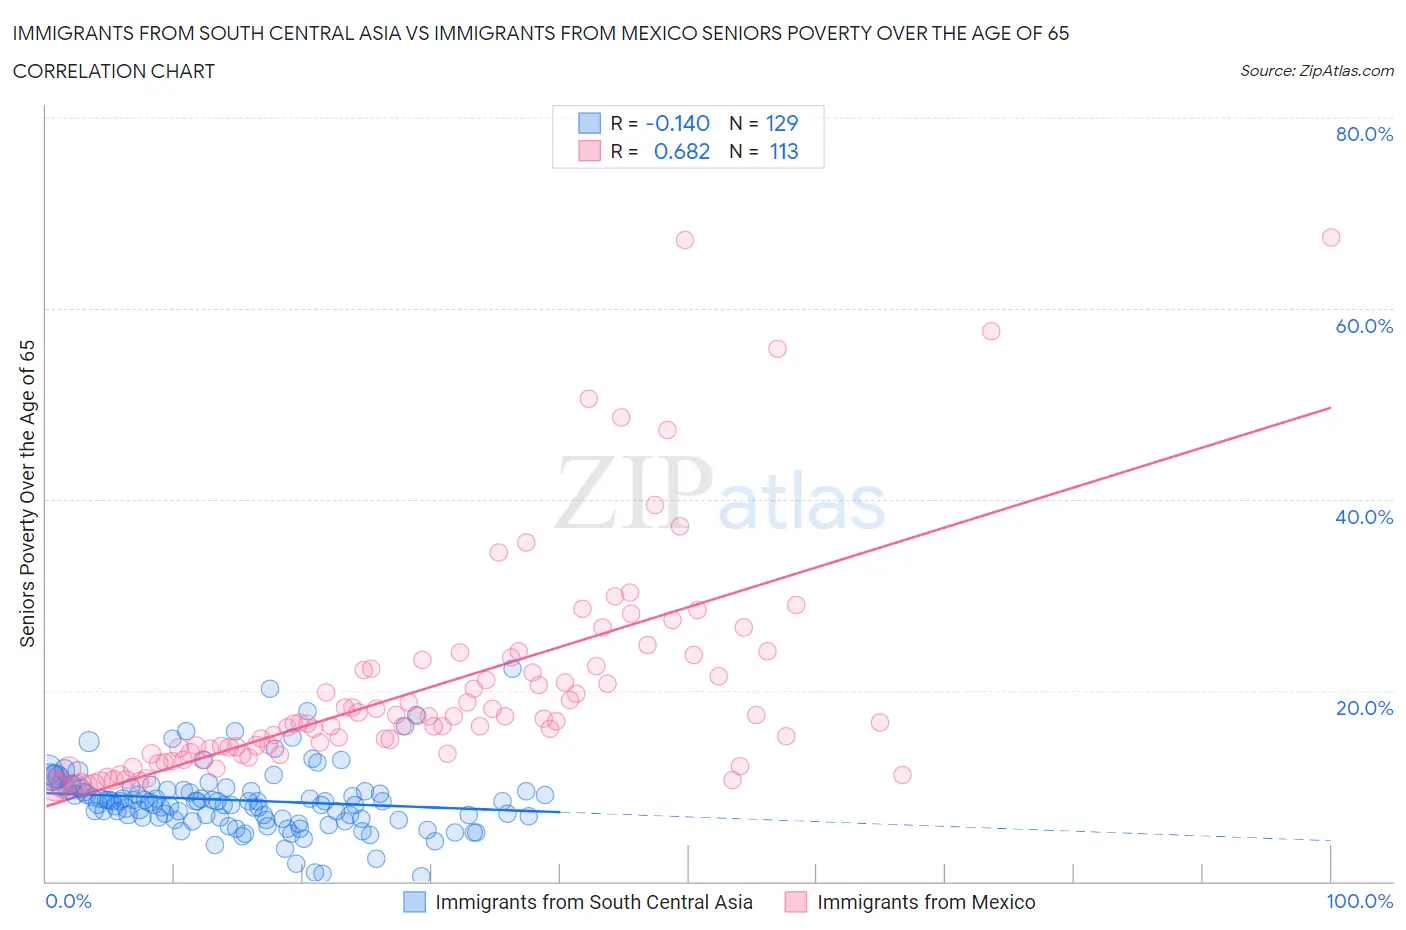 Immigrants from South Central Asia vs Immigrants from Mexico Seniors Poverty Over the Age of 65